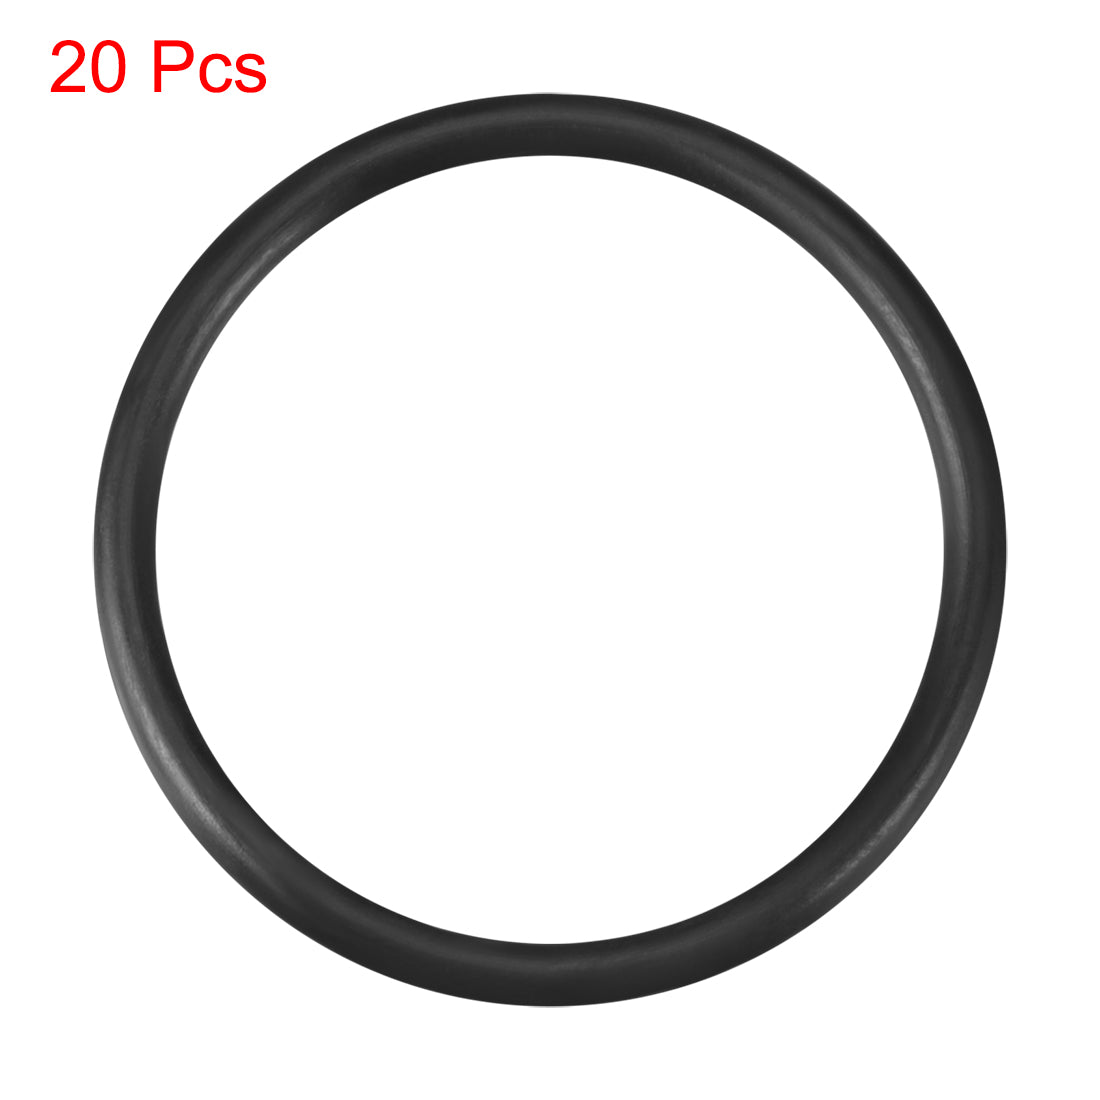 uxcell Uxcell O-Rings Nitrile Rubber 19mm x 22.6mm x 1.8mm Seal Rings Sealing Gasket 20pcs